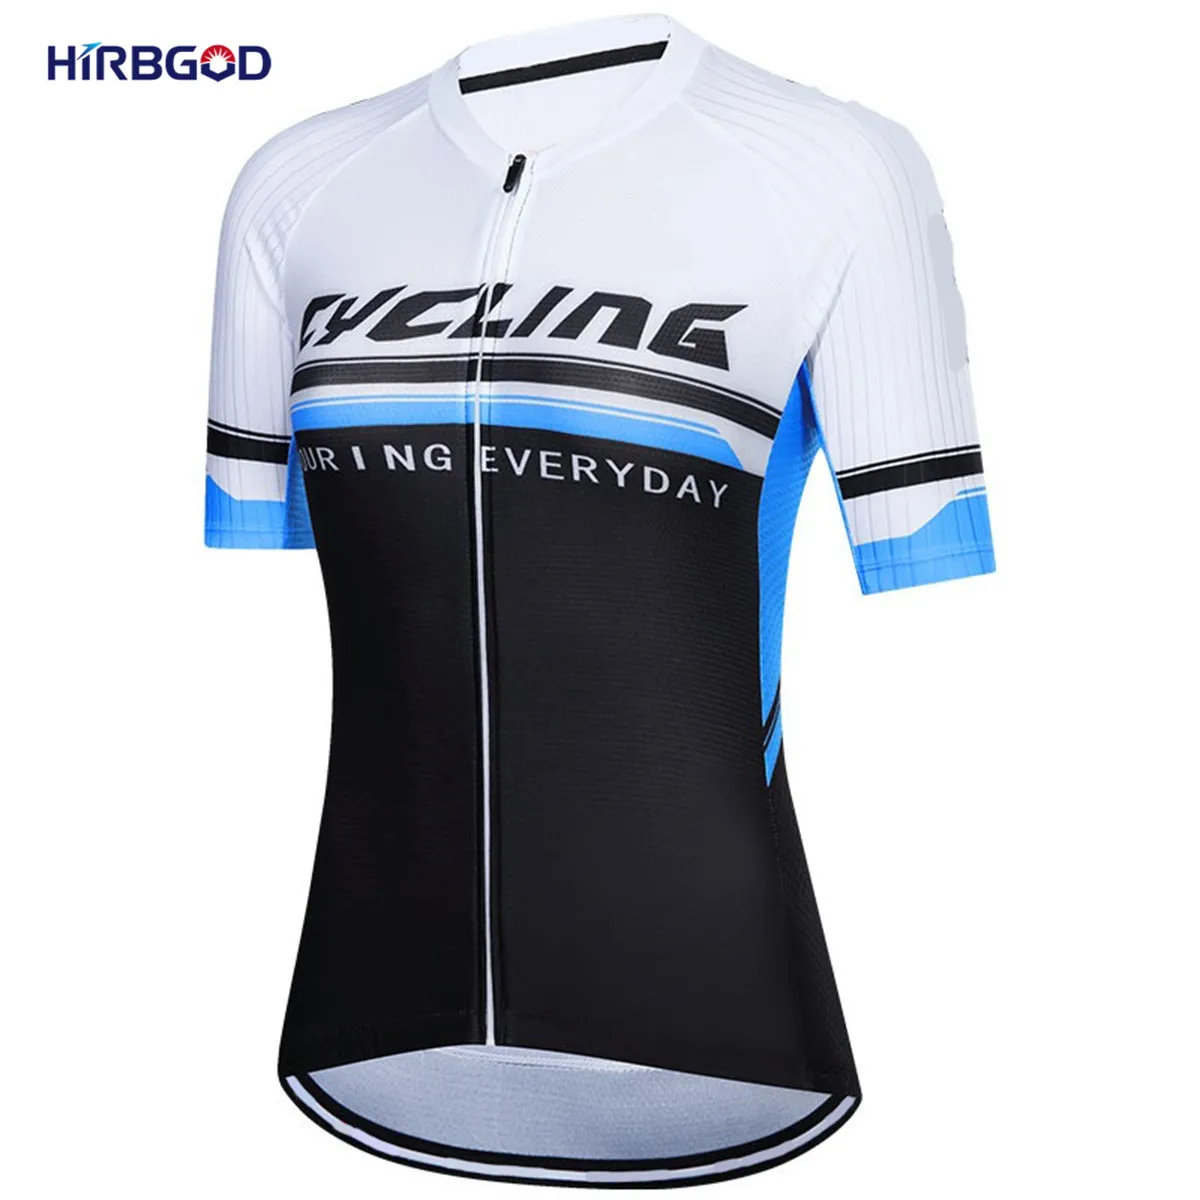 

HIRBGOD Cycling Jersey Pro Women MTB Team Biking Clothing Downhill Bicycle Shirt Summer Qiuck Dry Breathable Maillot Ciclismo